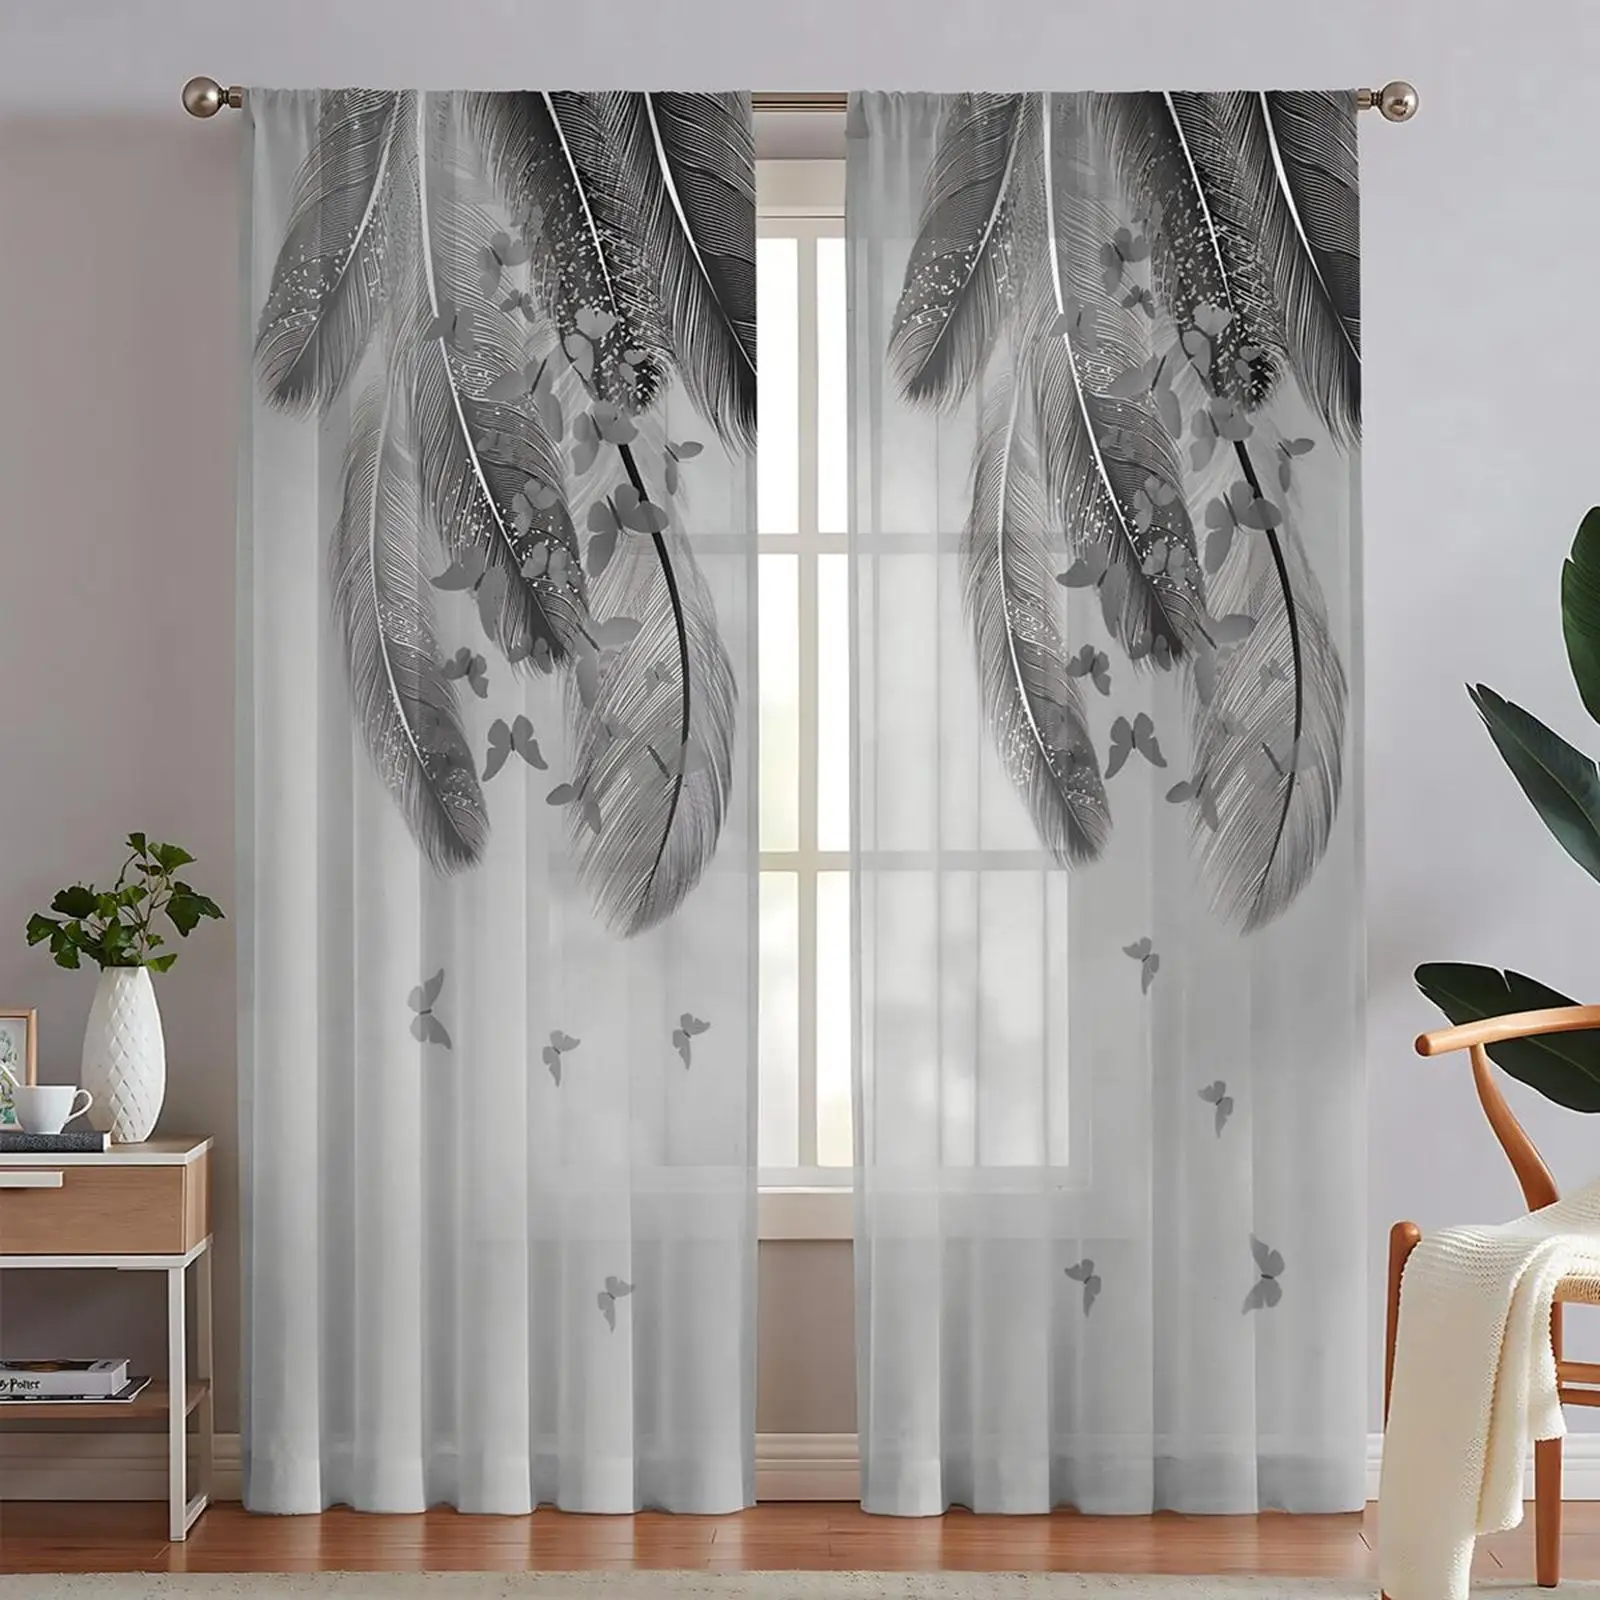 Grey Yarn Curtain Versatile Breathable Home Decoration Semi Sheer Voile Window Curtains for Living Room Patio Bedroom Home Decor